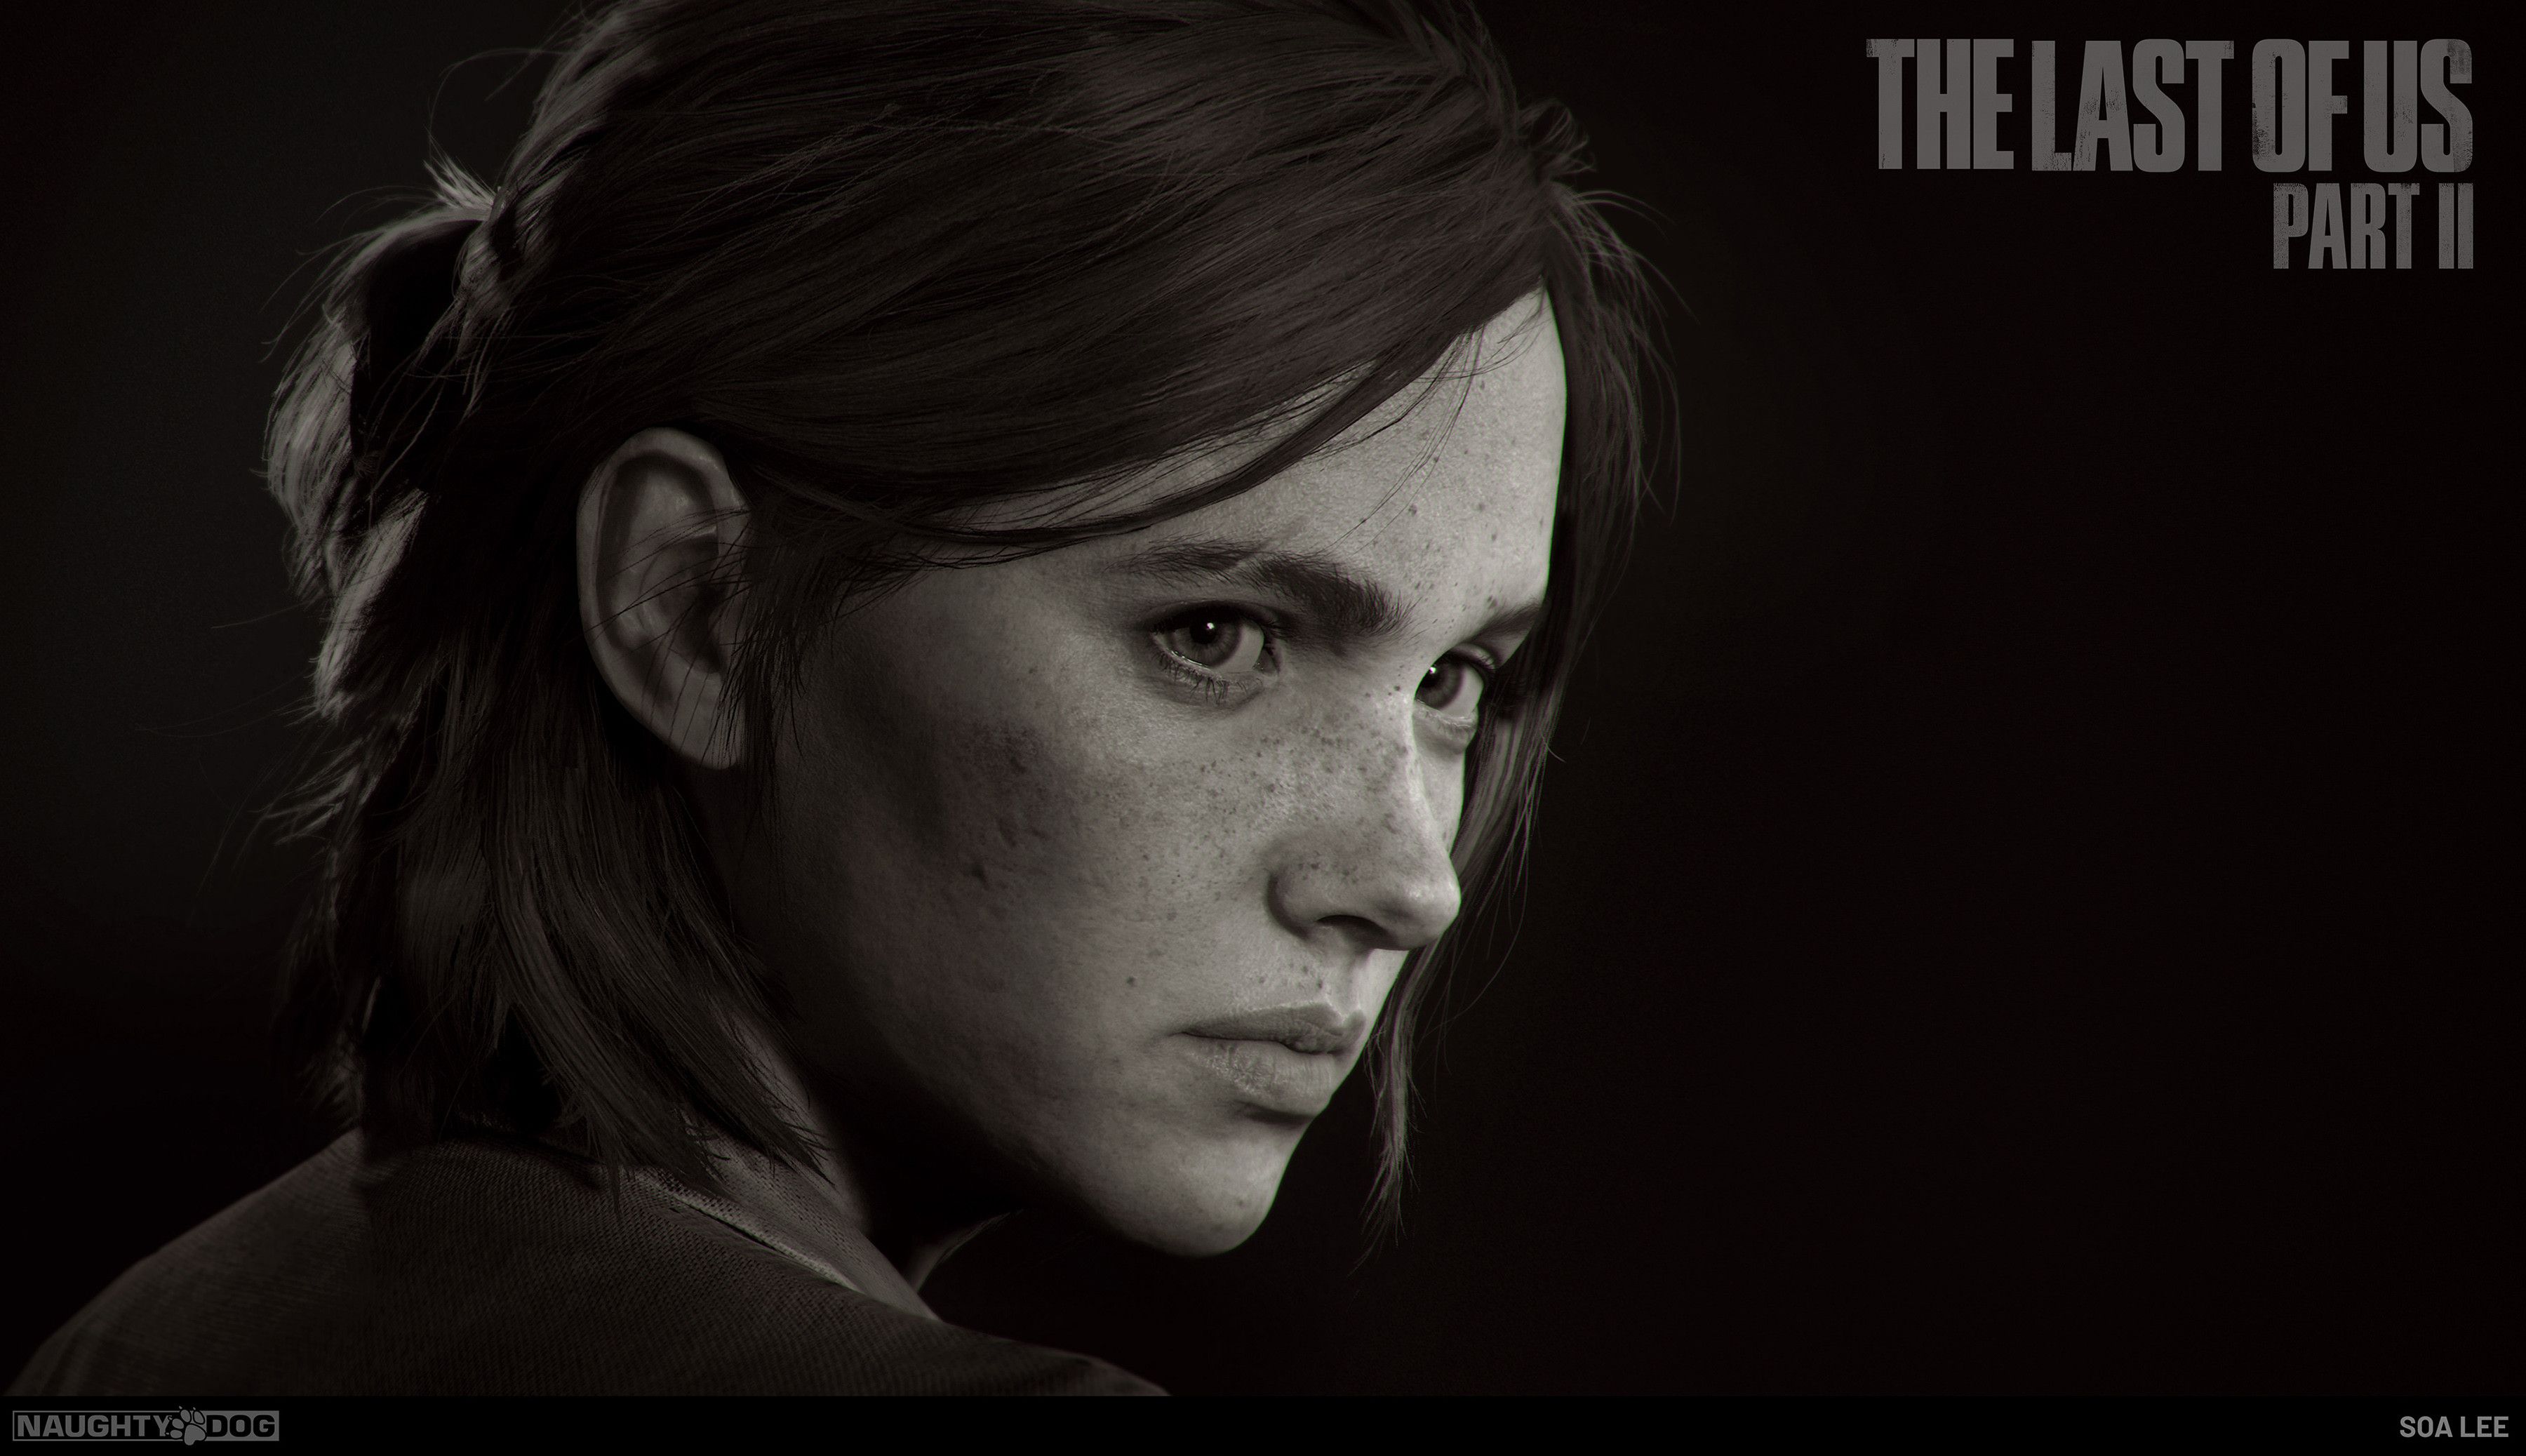 Wallpaper, The Last of Us video games, Ellie, Video Game Art, artwork, Naughty Dog, face, sepia 3600x2075